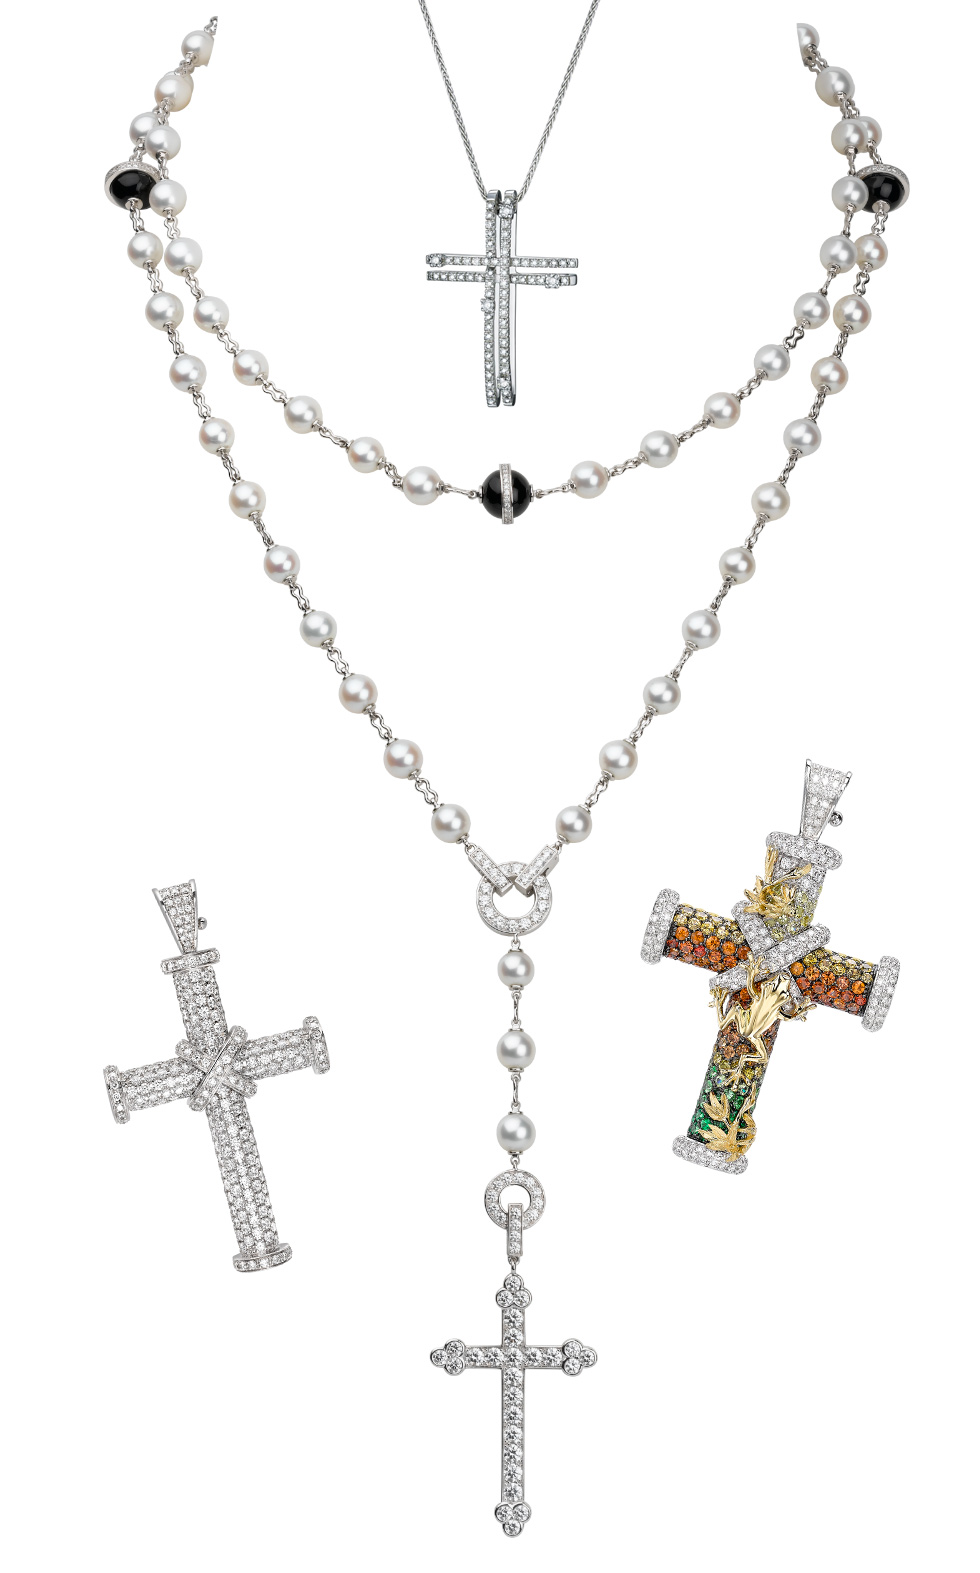 Top: Damiani cross pendant in white gold and diamonds; Cartier necklace with pearls in white gold and diamonds; Theo Fennell cross pendants